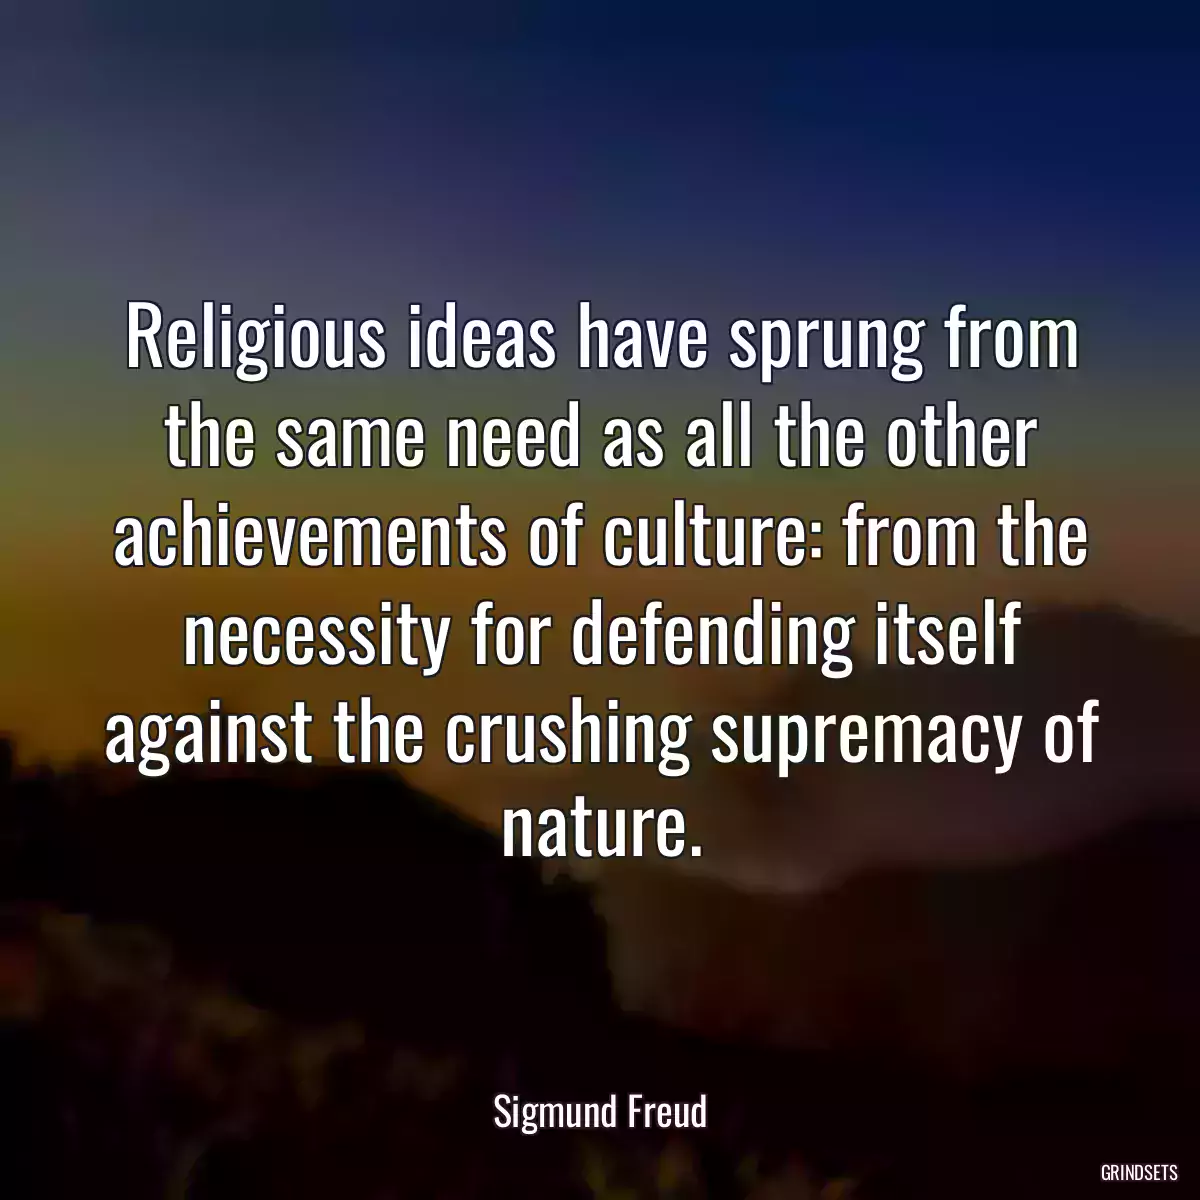 Religious ideas have sprung from the same need as all the other achievements of culture: from the necessity for defending itself against the crushing supremacy of nature.